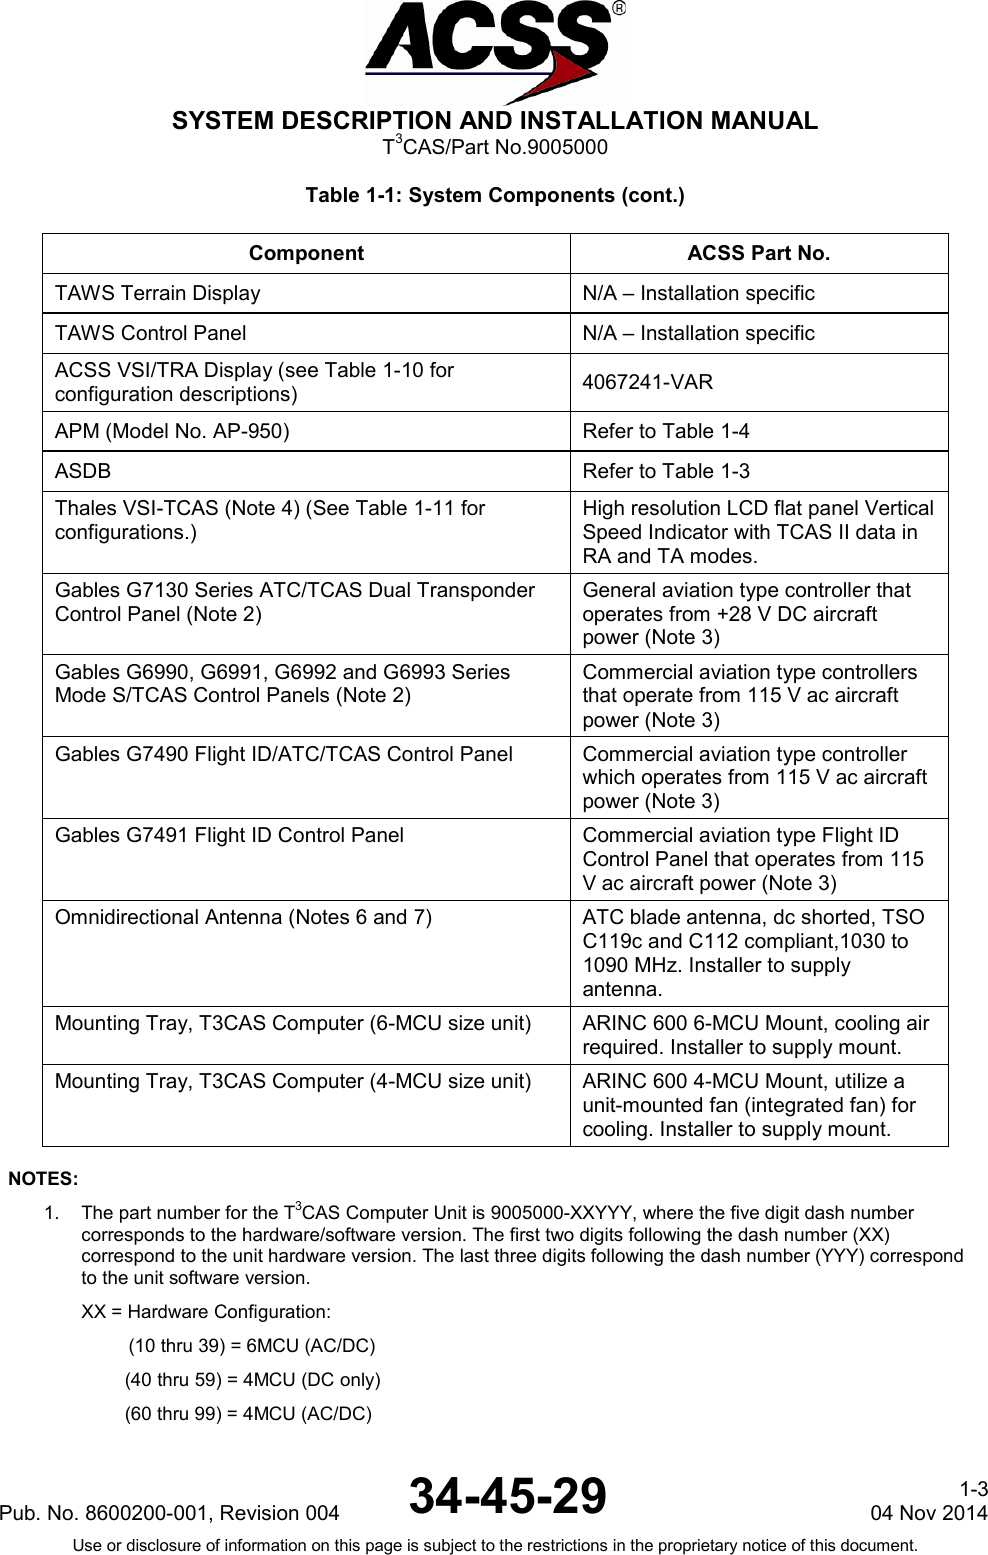  SYSTEM DESCRIPTION AND INSTALLATION MANUAL T3CAS/Part No.9005000 Table 1-1: System Components (cont.) Component ACSS Part No. TAWS Terrain Display N/A – Installation specific TAWS Control Panel N/A – Installation specific ACSS VSI/TRA Display (see Table 1-10 for configuration descriptions) 4067241-VAR APM (Model No. AP-950) Refer to Table 1-4 ASDB Refer to Table 1-3 Thales VSI-TCAS (Note 4) (See Table 1-11 for configurations.) High resolution LCD flat panel Vertical Speed Indicator with TCAS II data in RA and TA modes. Gables G7130 Series ATC/TCAS Dual Transponder Control Panel (Note 2)  General aviation type controller that operates from +28 V DC aircraft power (Note 3) Gables G6990, G6991, G6992 and G6993 Series Mode S/TCAS Control Panels (Note 2) Commercial aviation type controllers that operate from 115 V ac aircraft power (Note 3) Gables G7490 Flight ID/ATC/TCAS Control Panel Commercial aviation type controller which operates from 115 V ac aircraft power (Note 3) Gables G7491 Flight ID Control Panel Commercial aviation type Flight ID Control Panel that operates from 115 V ac aircraft power (Note 3) Omnidirectional Antenna (Notes 6 and 7) ATC blade antenna, dc shorted, TSO C119c and C112 compliant,1030 to 1090 MHz. Installer to supply antenna. Mounting Tray, T3CAS Computer (6-MCU size unit) ARINC 600 6-MCU Mount, cooling air required. Installer to supply mount. Mounting Tray, T3CAS Computer (4-MCU size unit) ARINC 600 4-MCU Mount, utilize a unit-mounted fan (integrated fan) for cooling. Installer to supply mount.  NOTES: 1. The part number for the T3CAS Computer Unit is 9005000-XXYYY, where the five digit dash number corresponds to the hardware/software version. The first two digits following the dash number (XX) correspond to the unit hardware version. The last three digits following the dash number (YYY) correspond to the unit software version. XX = Hardware Configuration:            (10 thru 39) = 6MCU (AC/DC)          (40 thru 59) = 4MCU (DC only)          (60 thru 99) = 4MCU (AC/DC) Pub. No. 8600200-001, Revision 004 34-45-29 1-3 04 Nov 2014 Use or disclosure of information on this page is subject to the restrictions in the proprietary notice of this document.  